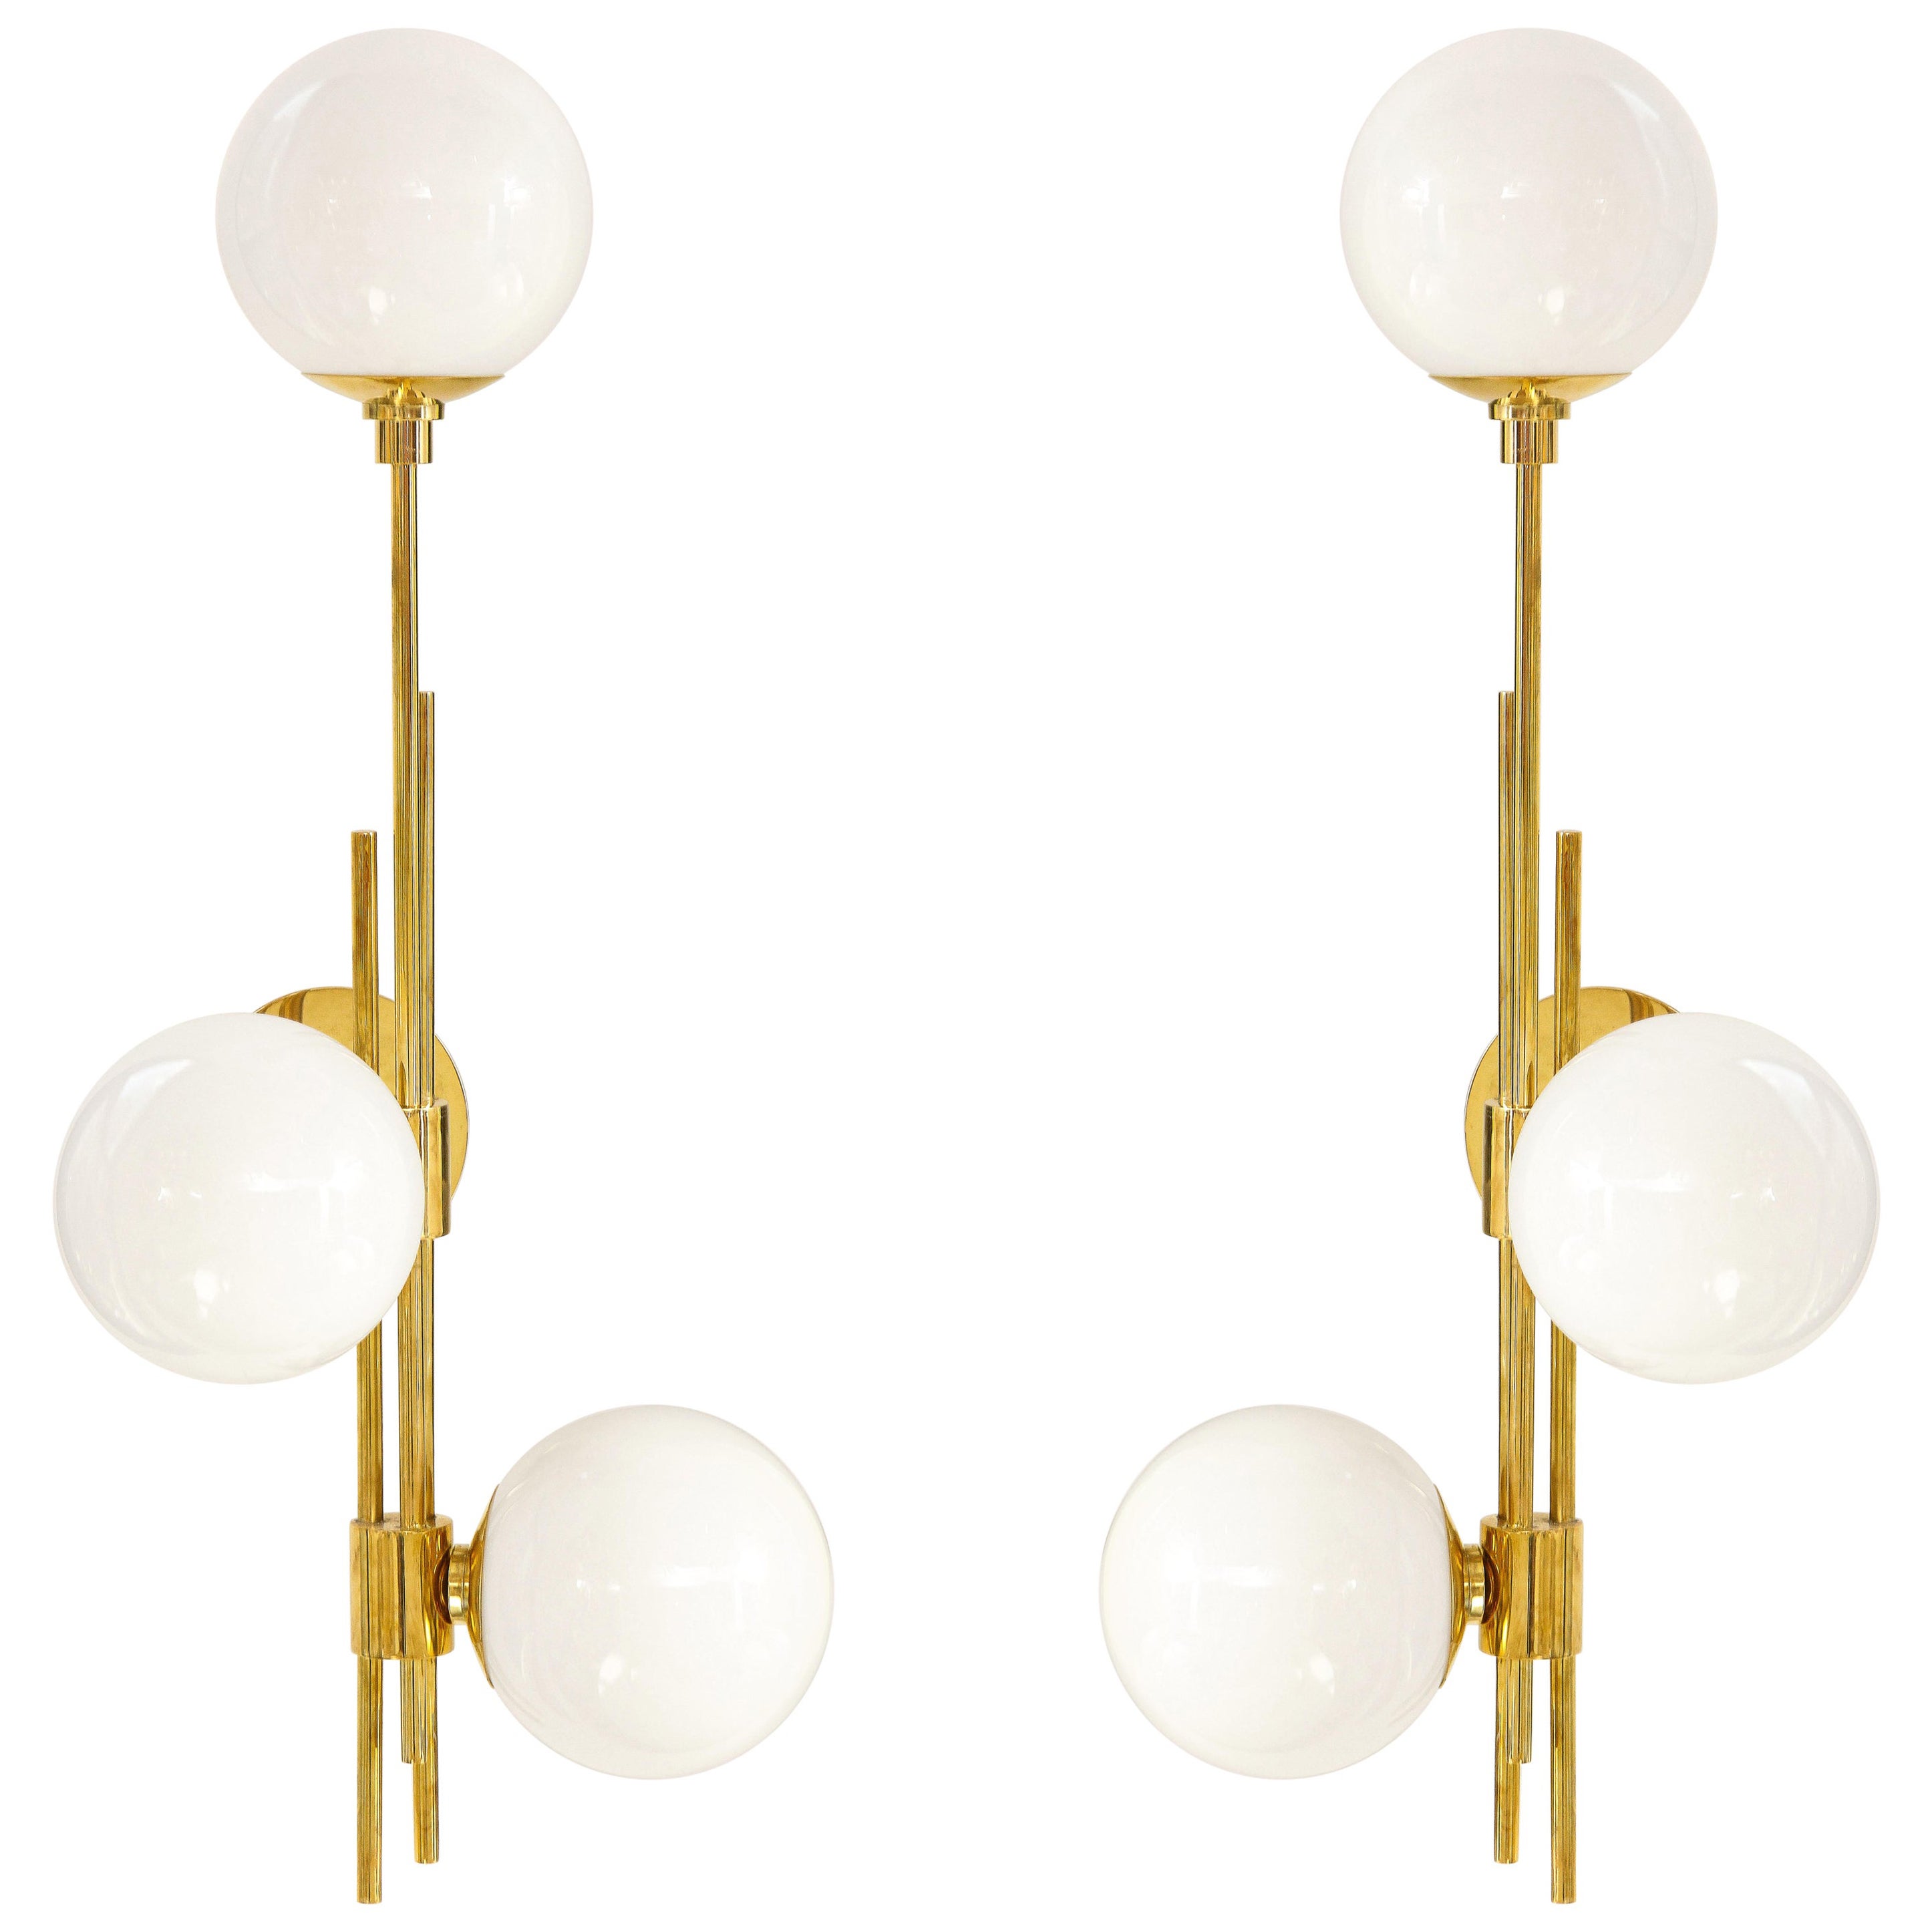 Tall Pair of Translucent White Murano Glass Globes and Brass Sconces, Italy 2022